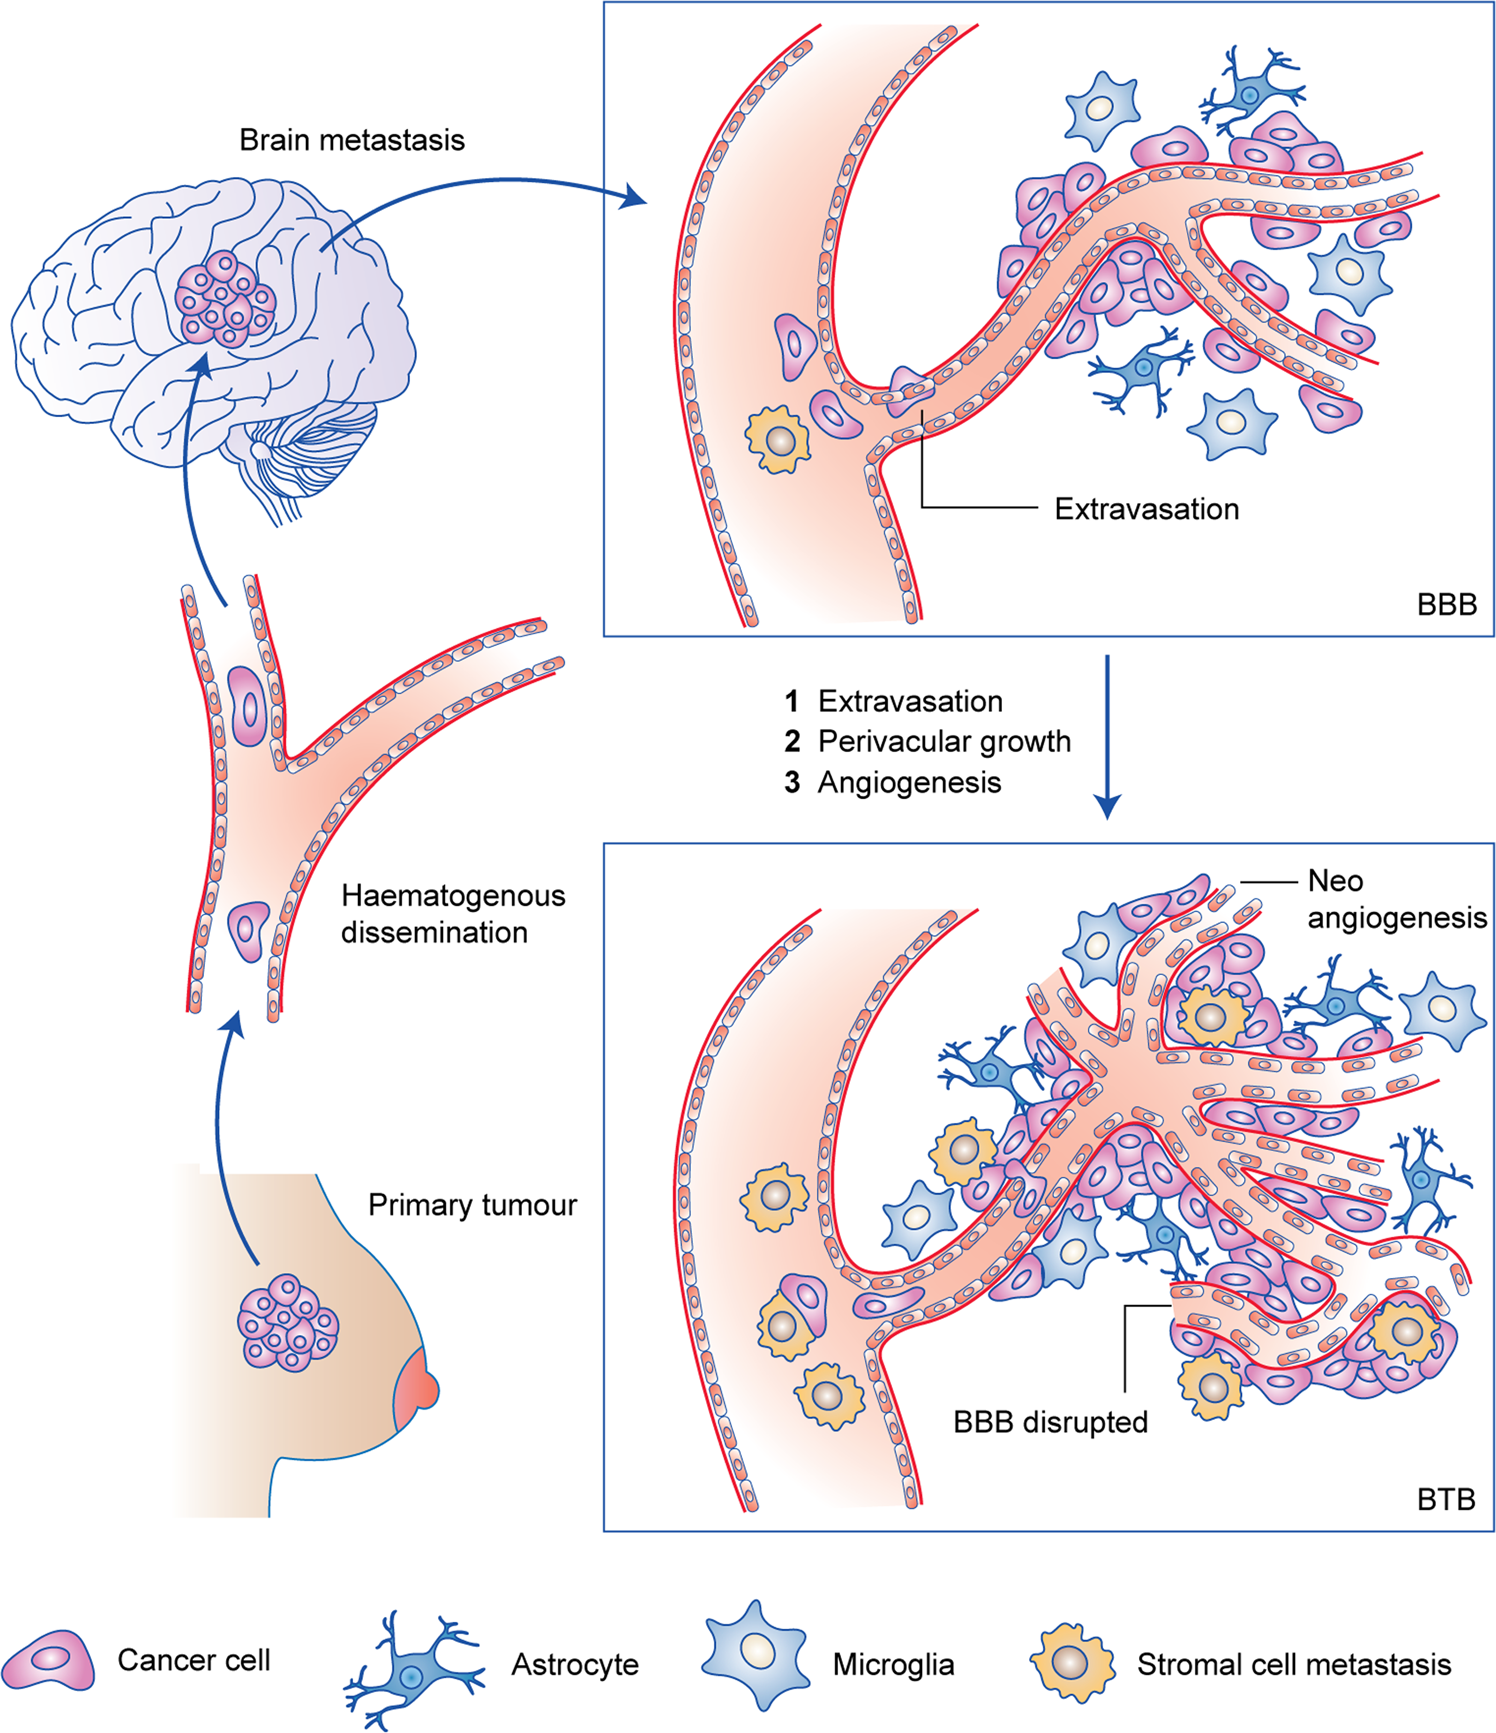 Treatment strategies for breast cancer brain metastases | British Journal  of Cancer